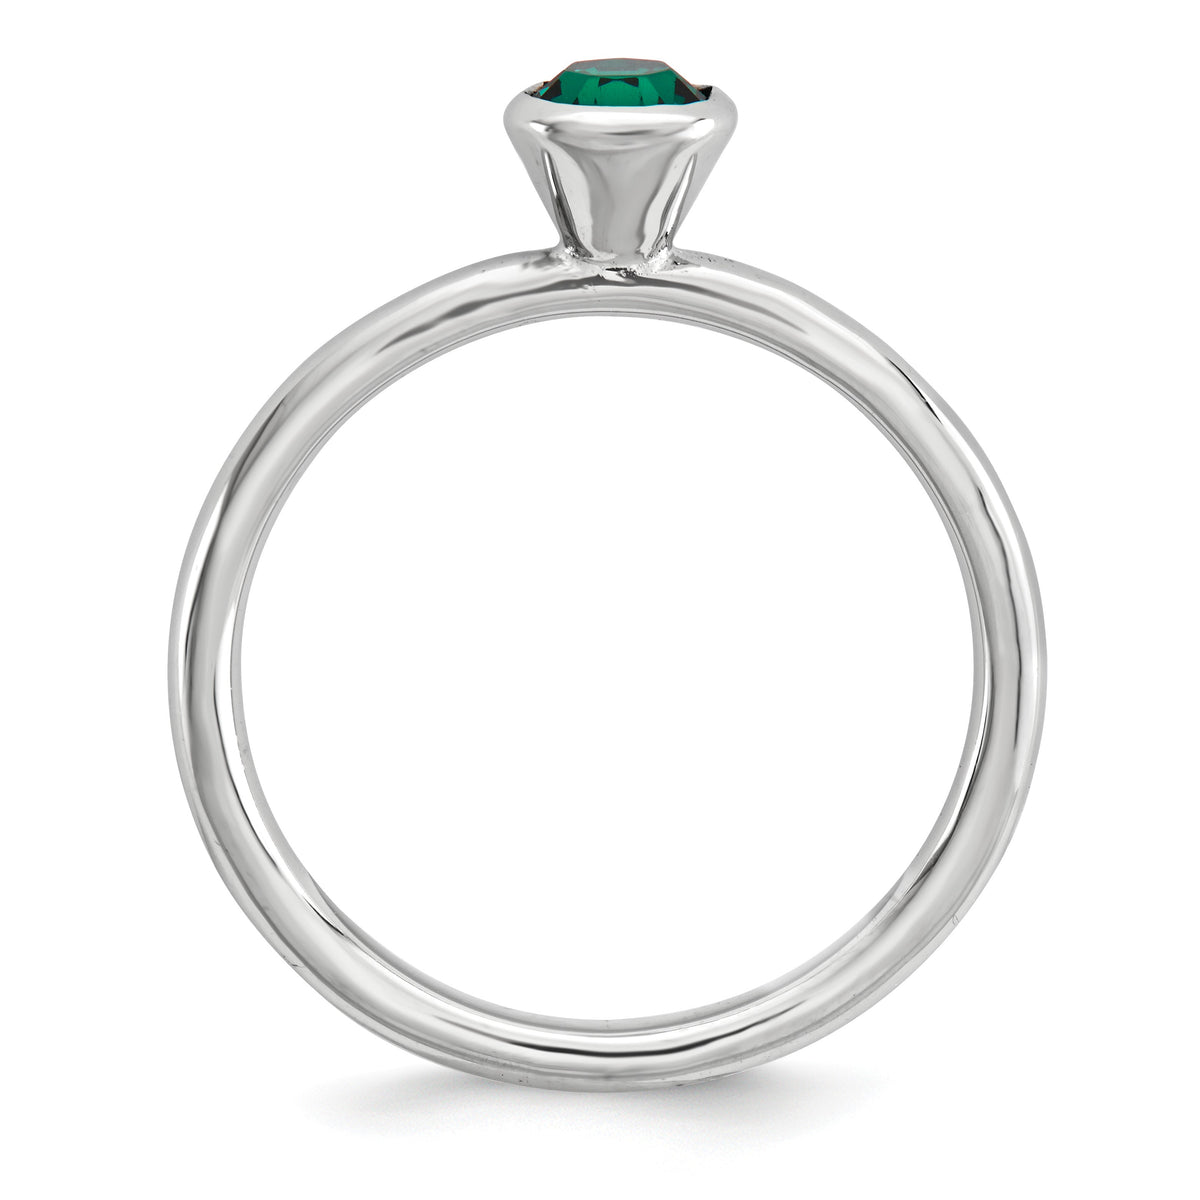 Alternate view of the Sterling Silver w/5mm Green Crystals High Profile Stack Ring by The Black Bow Jewelry Co.